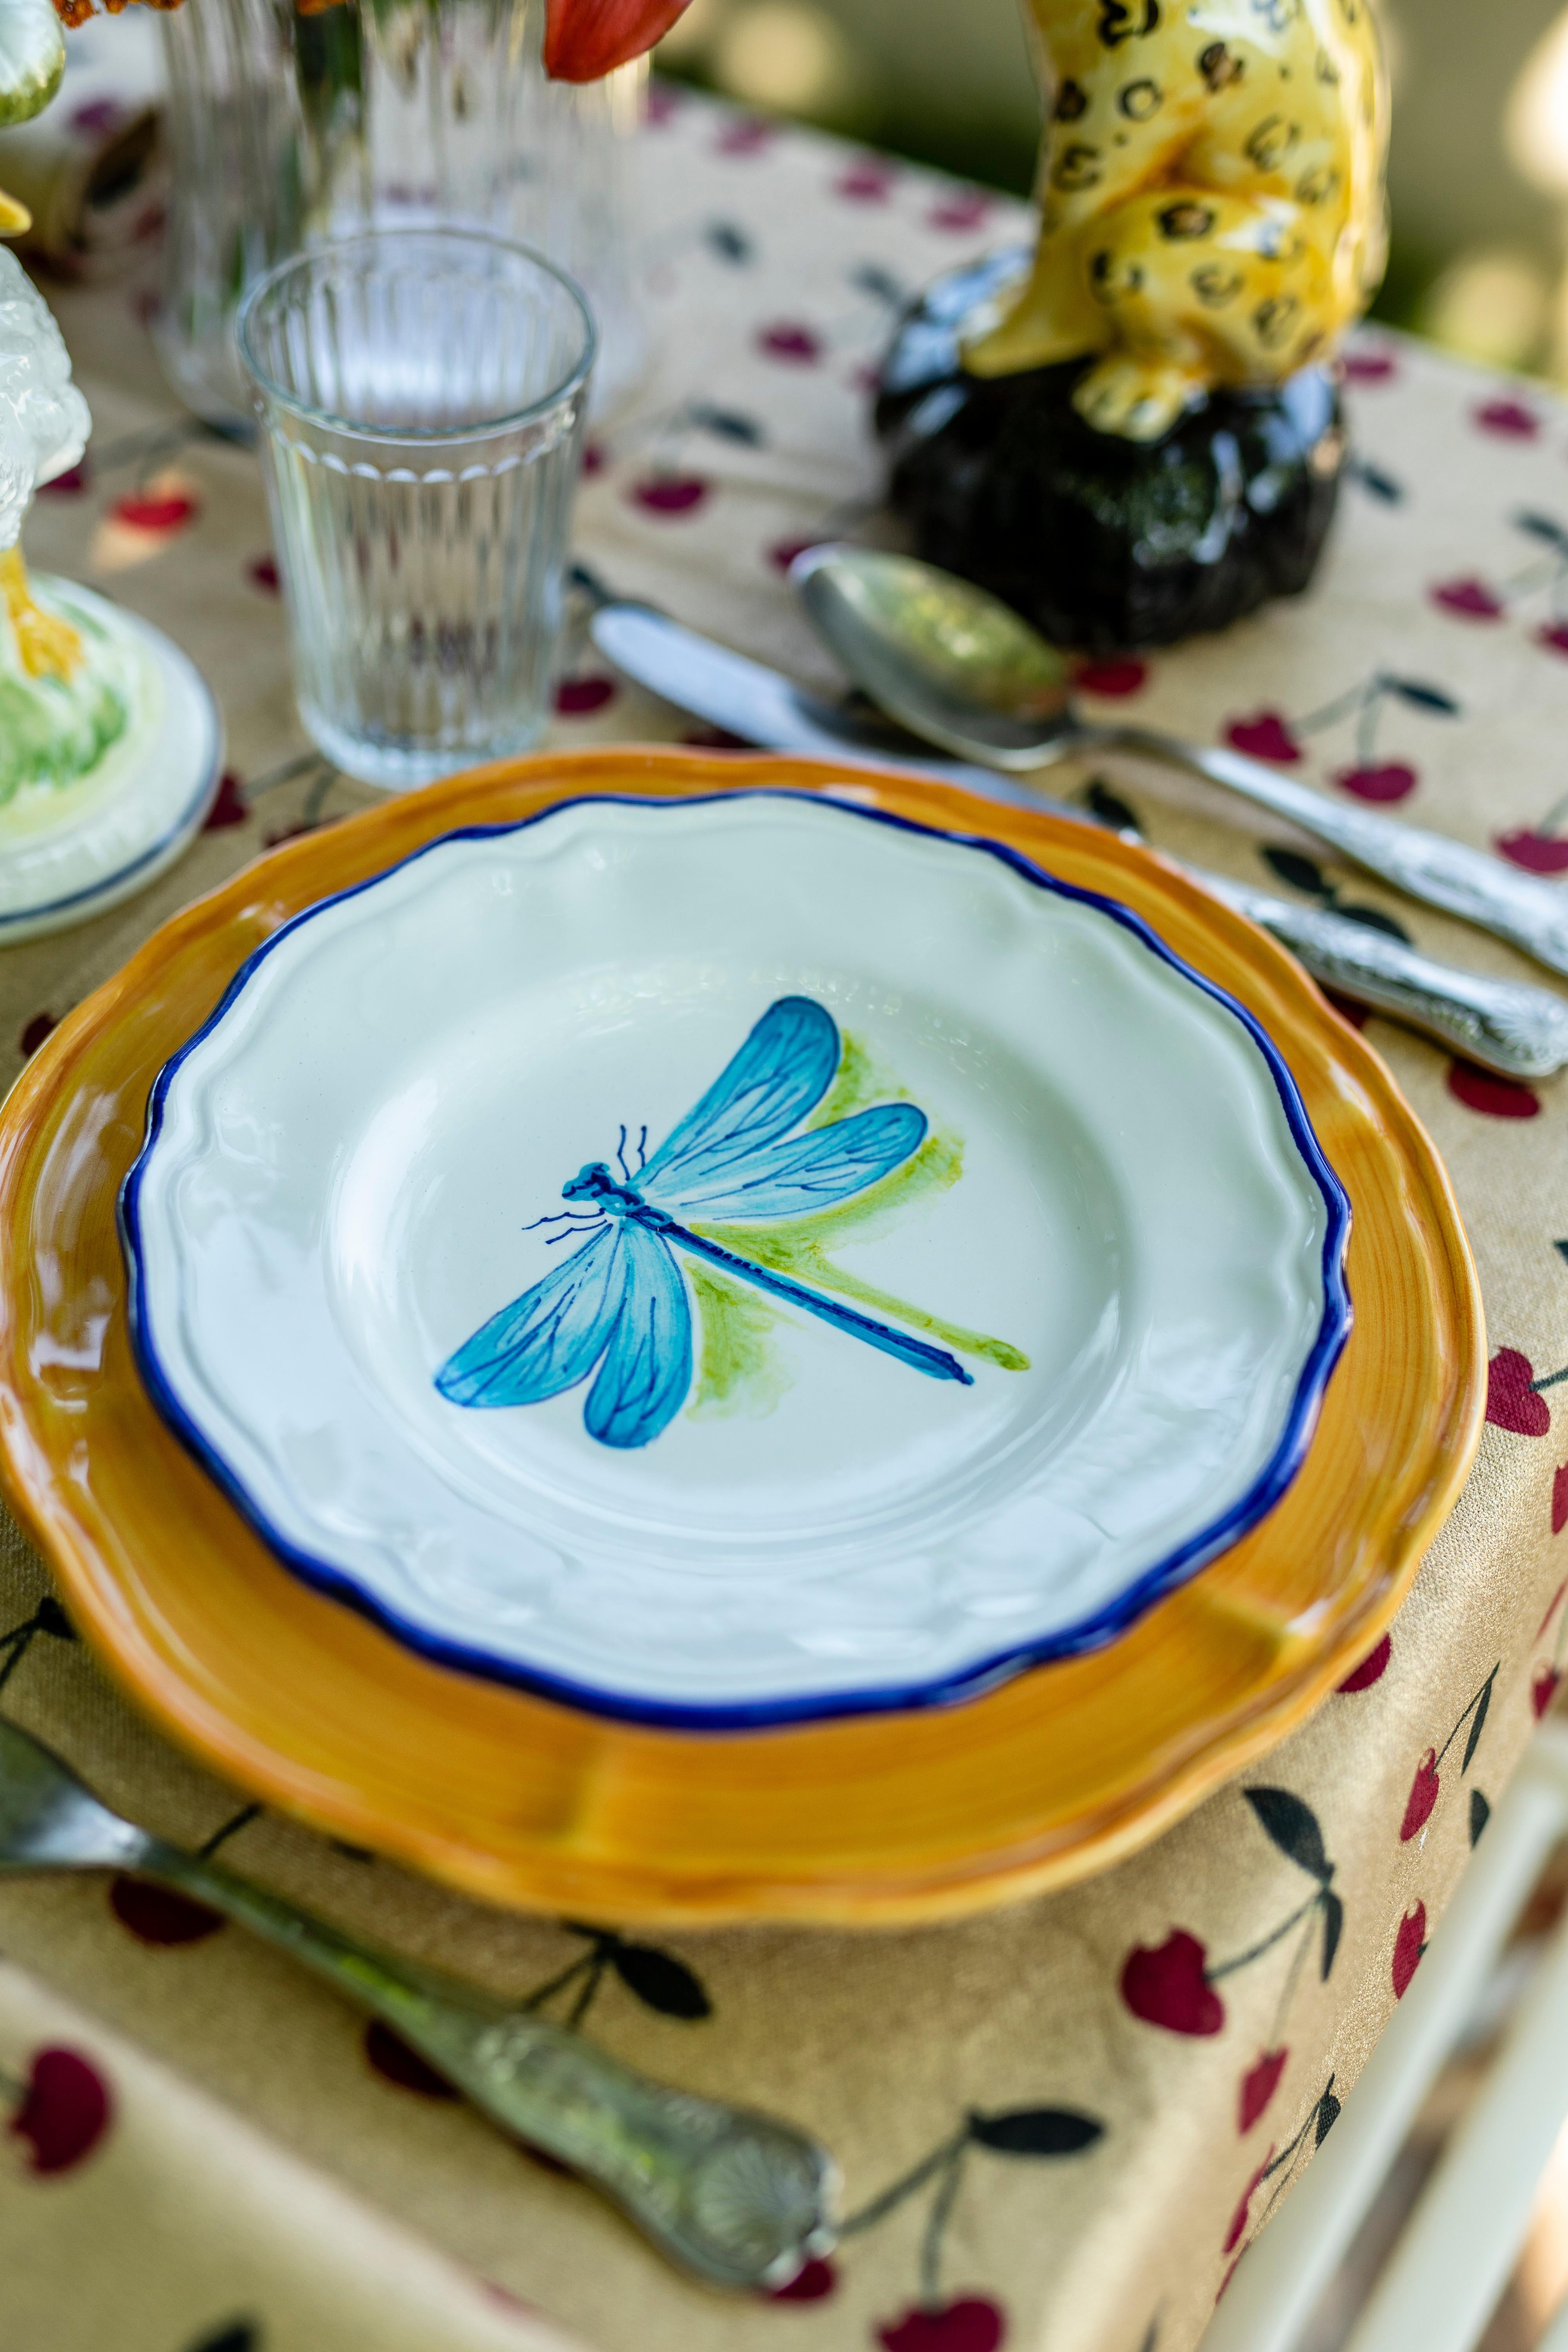 Italian Insect Handpainted Ceramic Dessert Plates Dragonfly For Sale